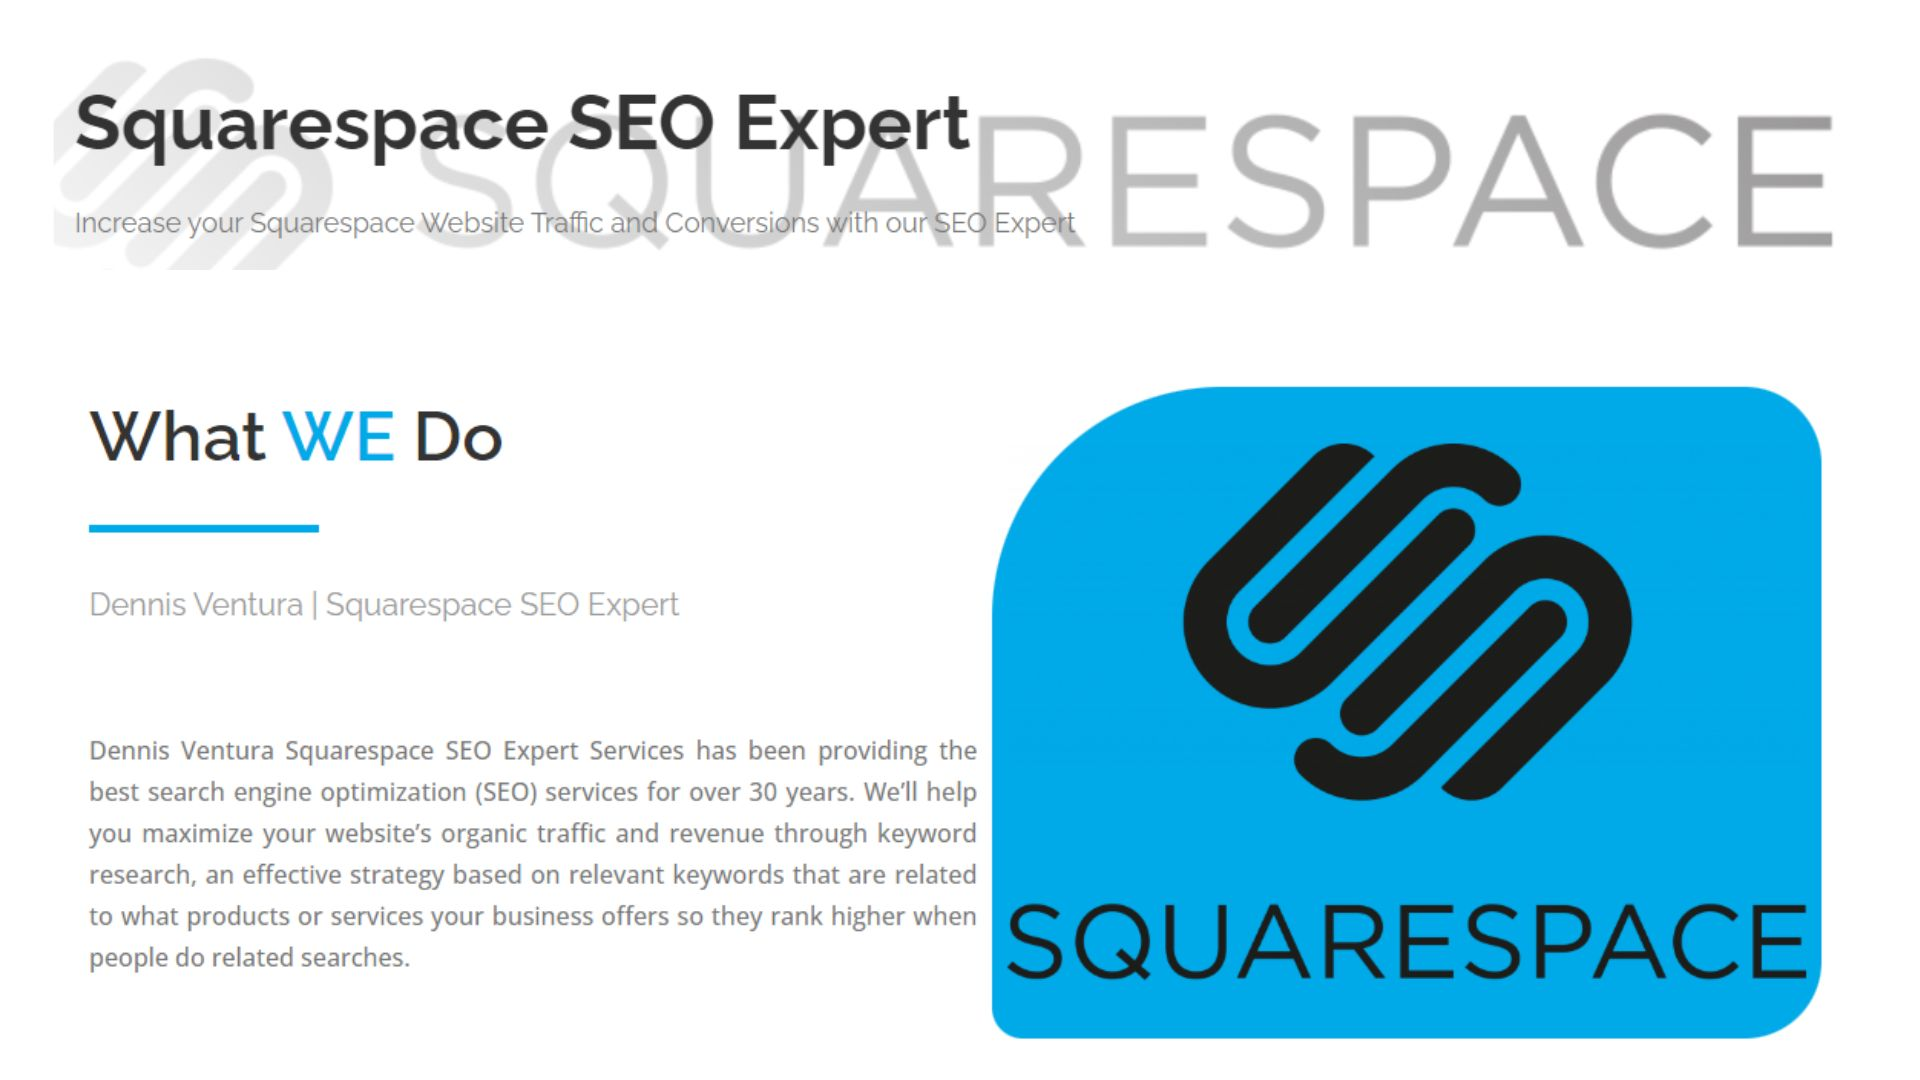 What Are The Best Practices Used By Squarespace SEO Expert?